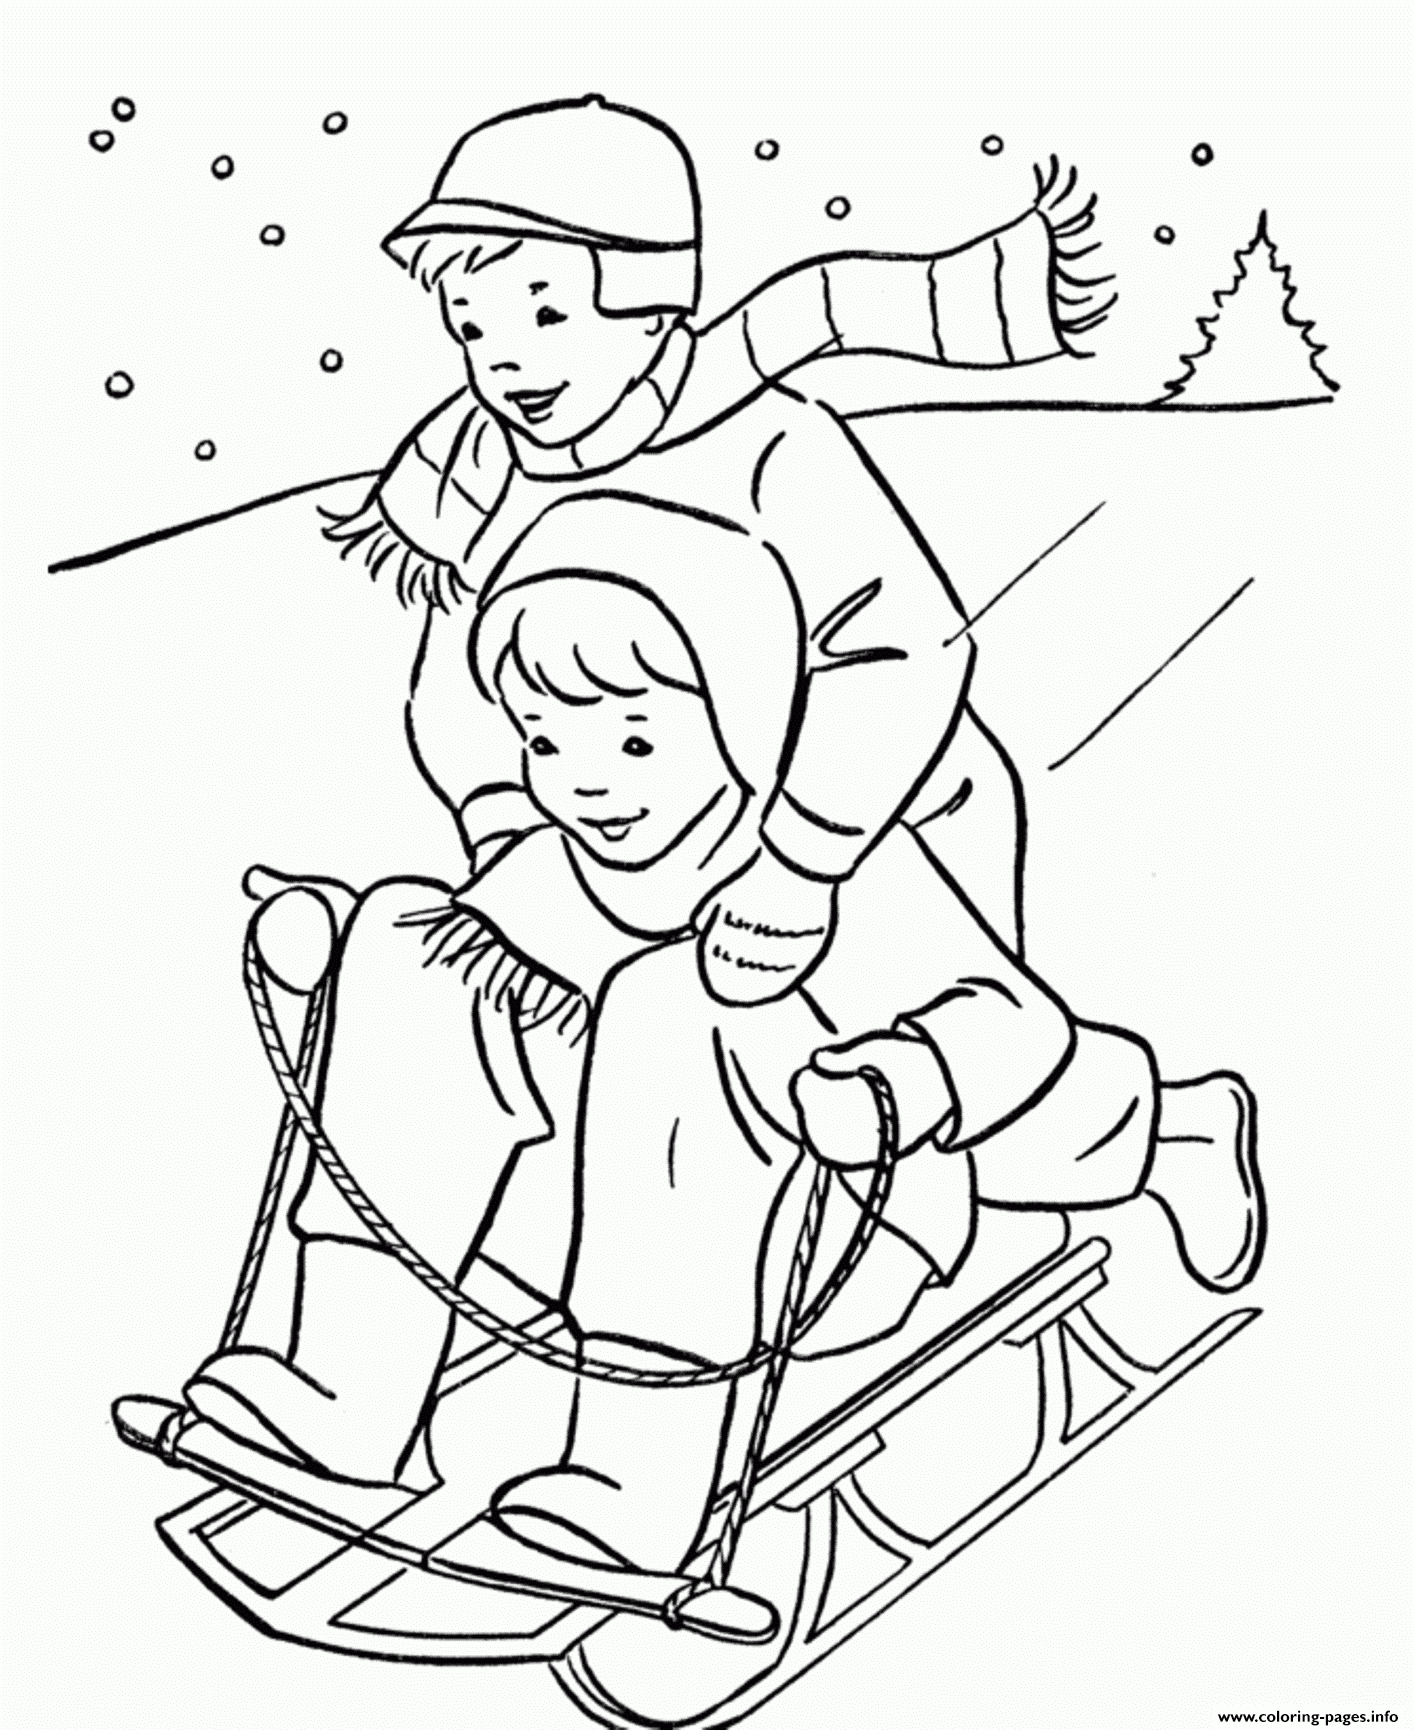 Winter Coloring Pages To Print Awesome Picture Inspirations Kids Playing  Sled In The5 Printable 1452800187kids – Dialogueeurope